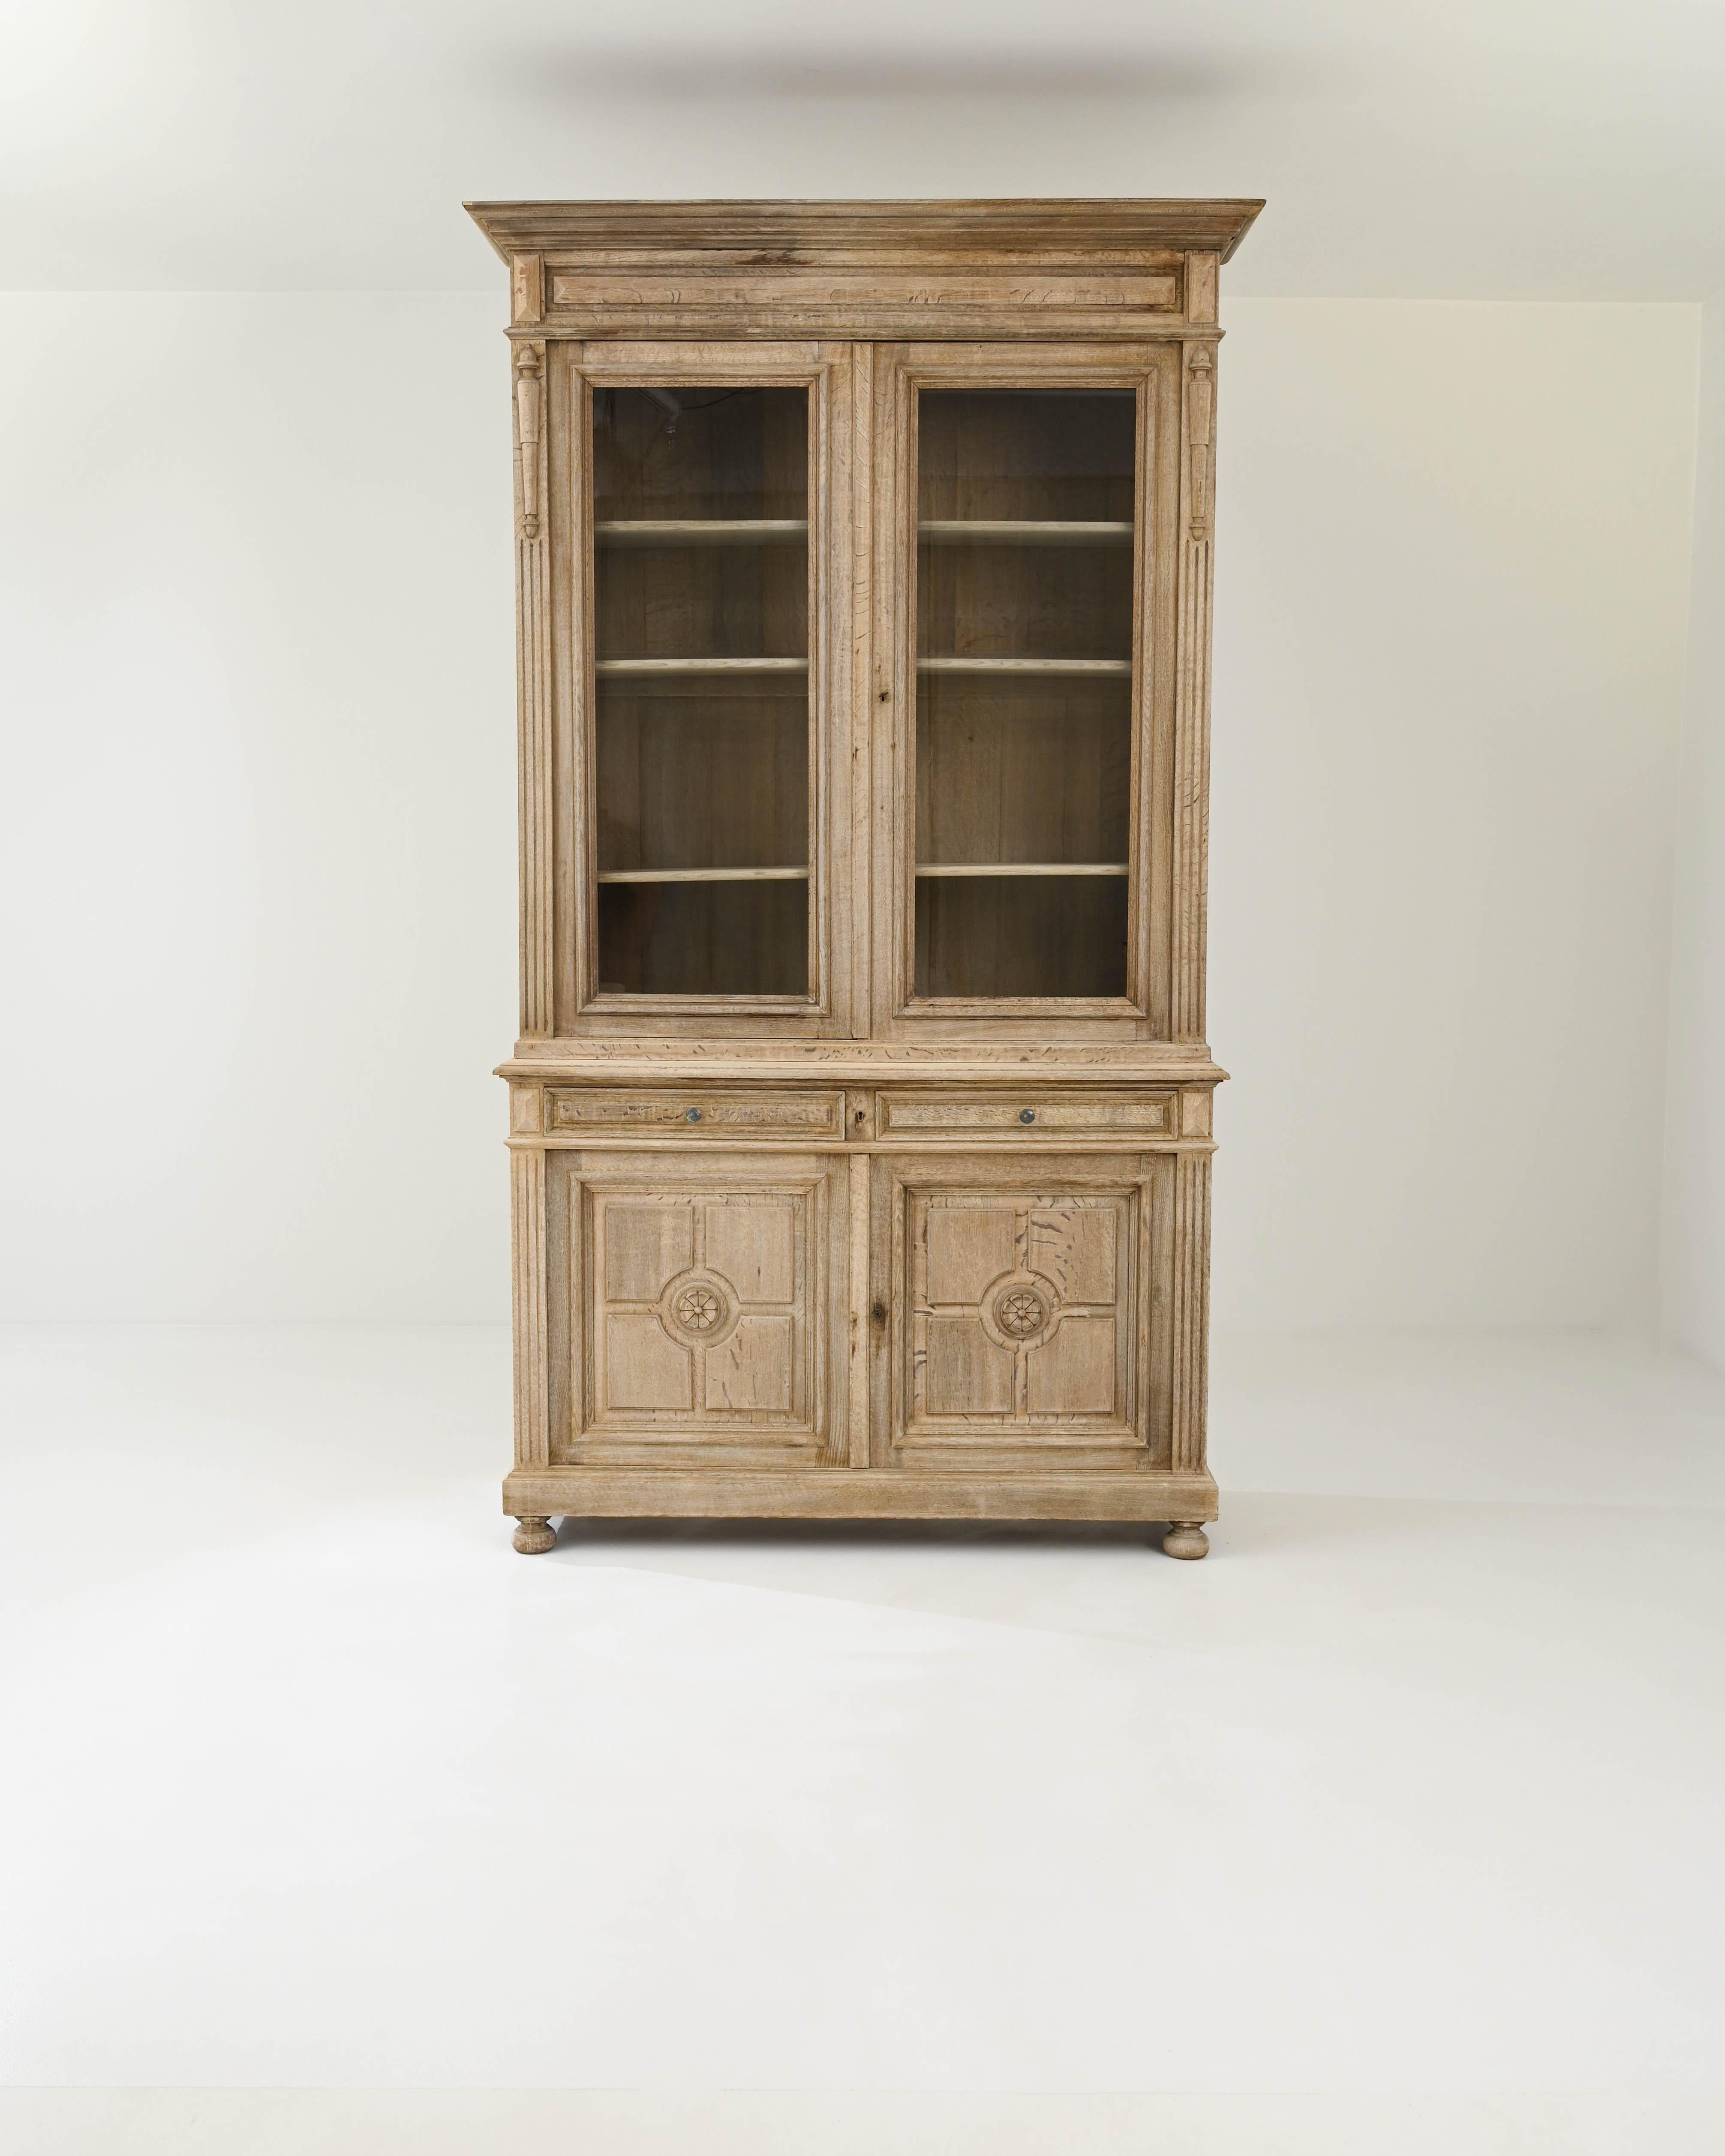 The impressive stature and Neoclassical refinement of this antique oak vitrine make it a sight to behold. Built in France in the 1800s, the tall cabinet is crowned by a carved cornice, giving the piece an architectural quality. The windows of the